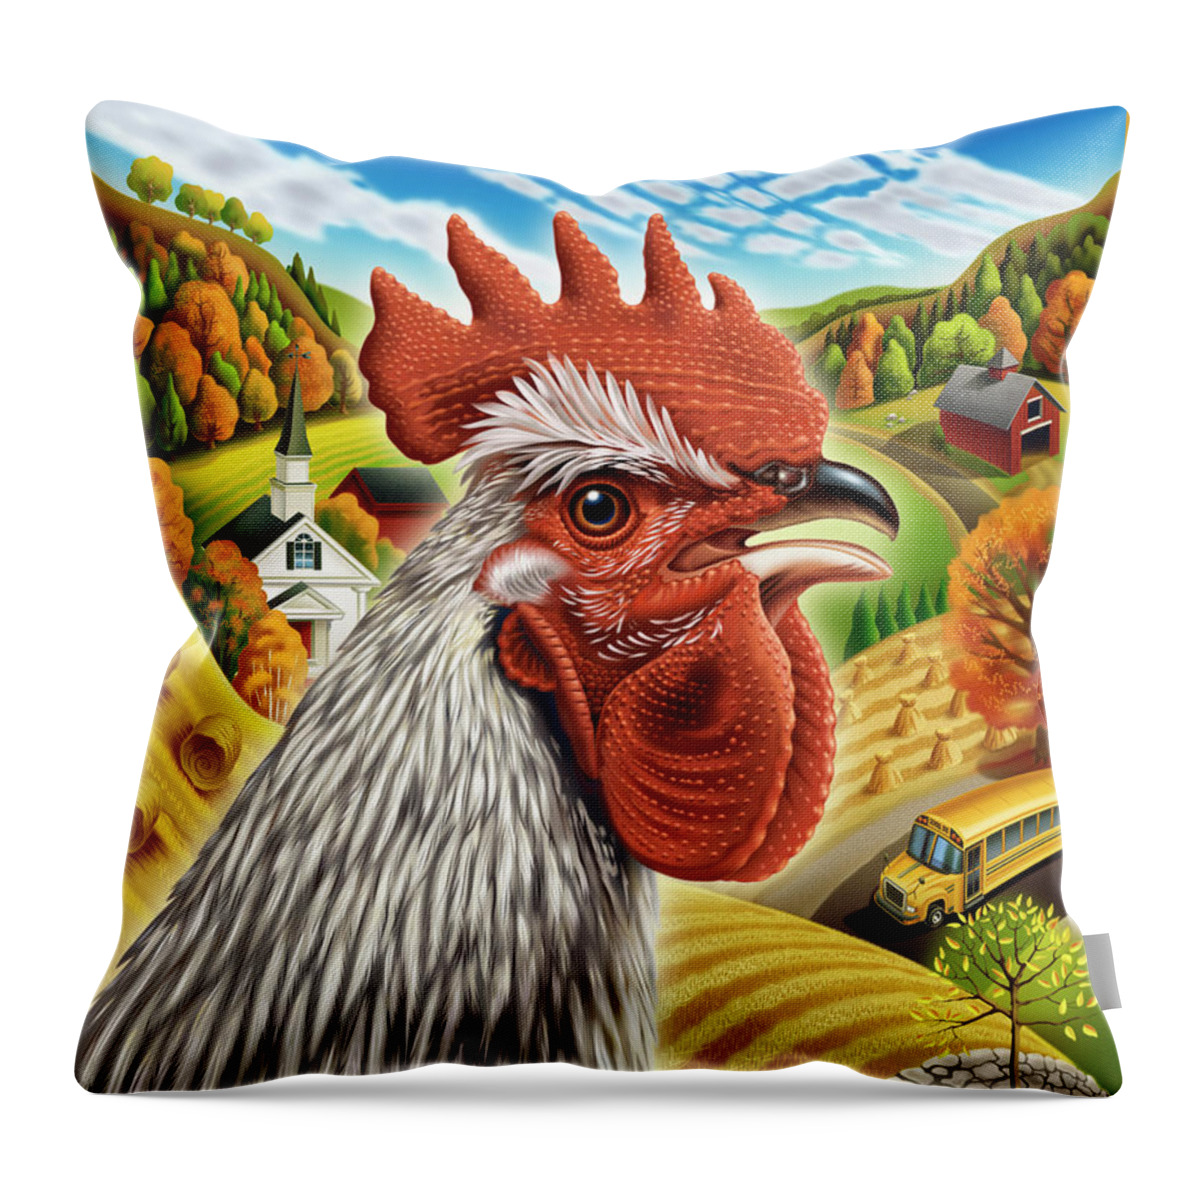 Morning Throw Pillow featuring the digital art The Morning Rooster by Garth Glazier